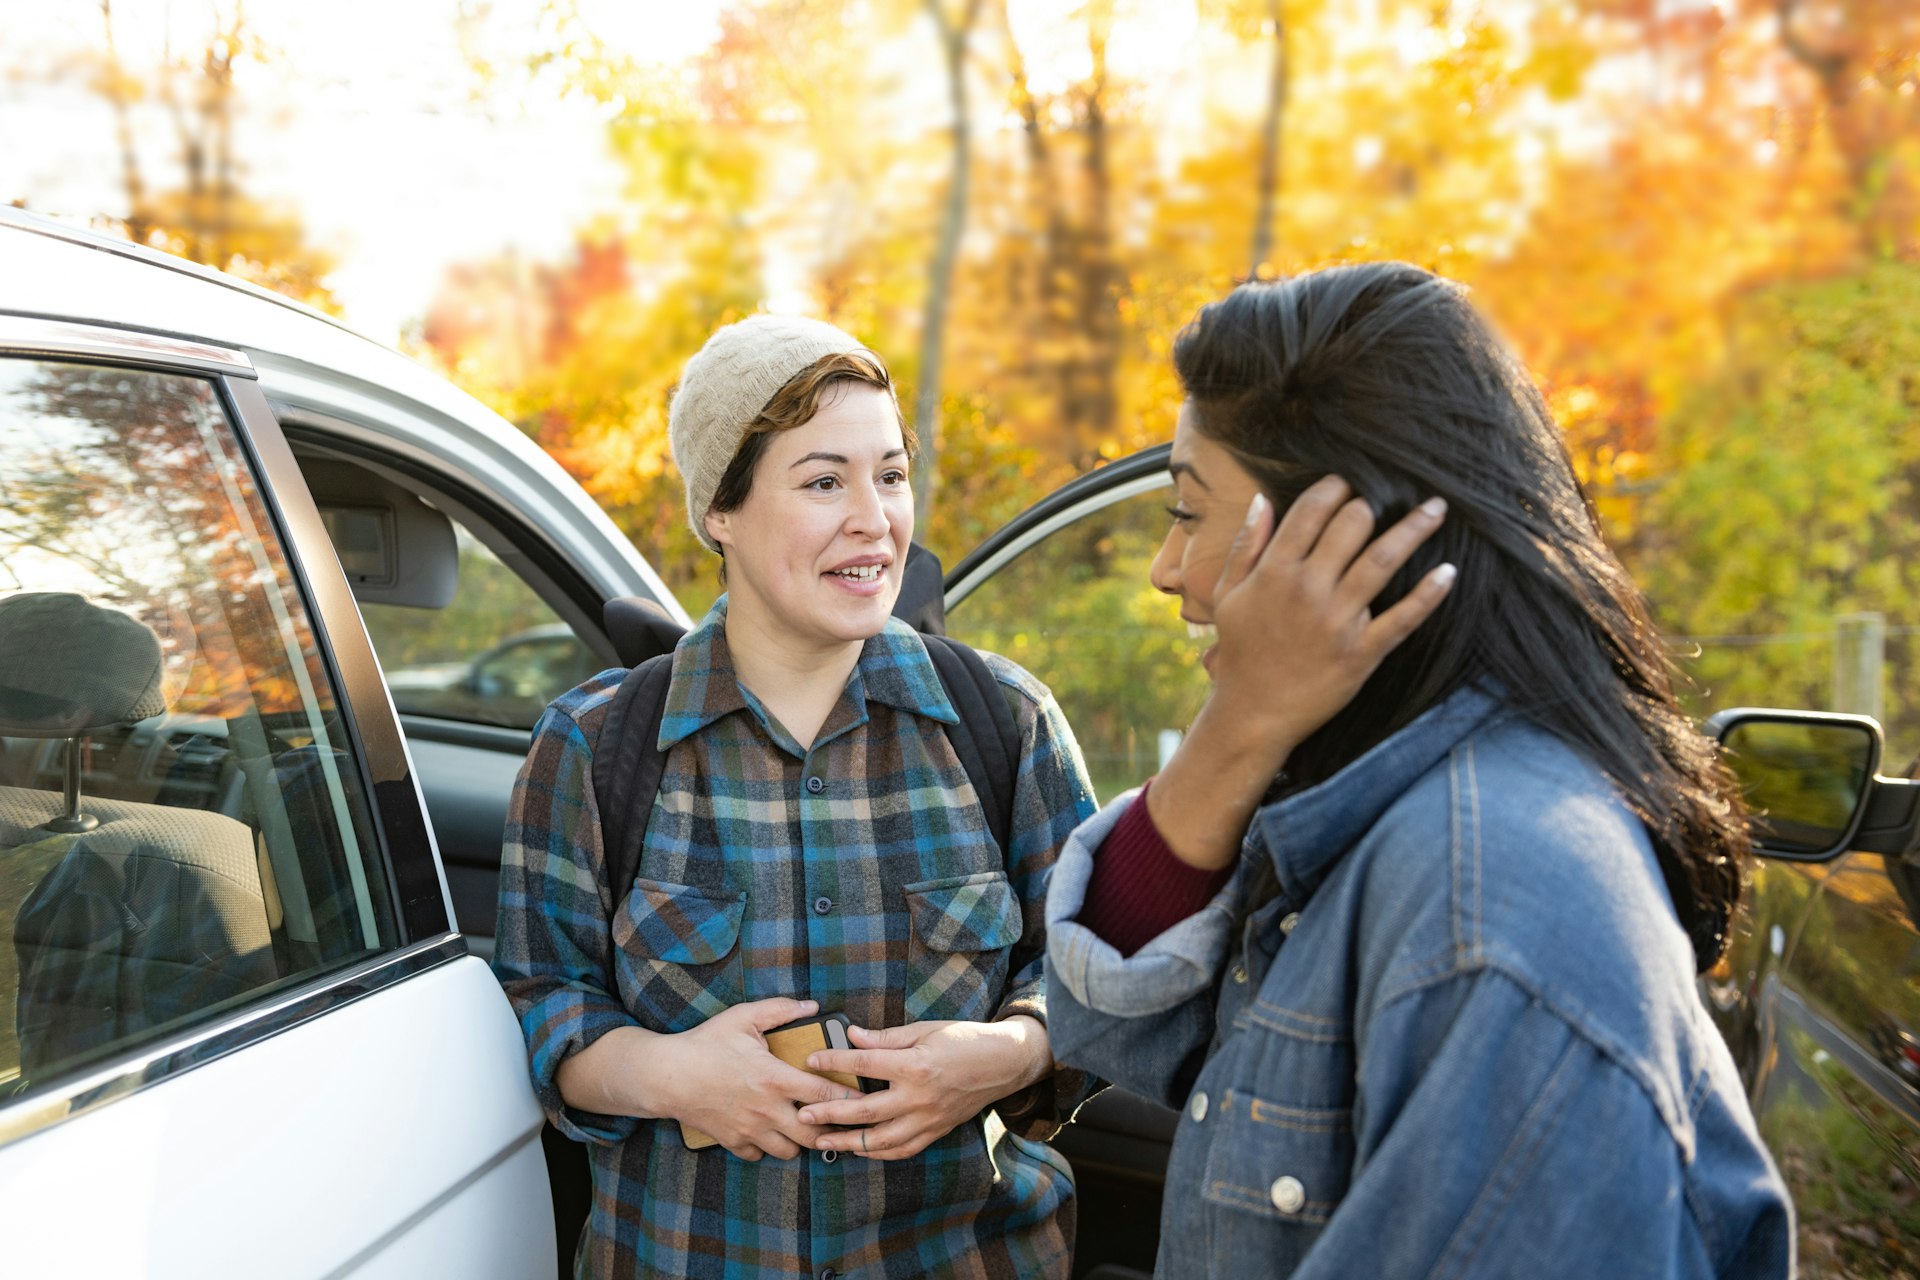 Two adult female friends of different ethnicities greet each other by the car in upstate New York on an autumn day.